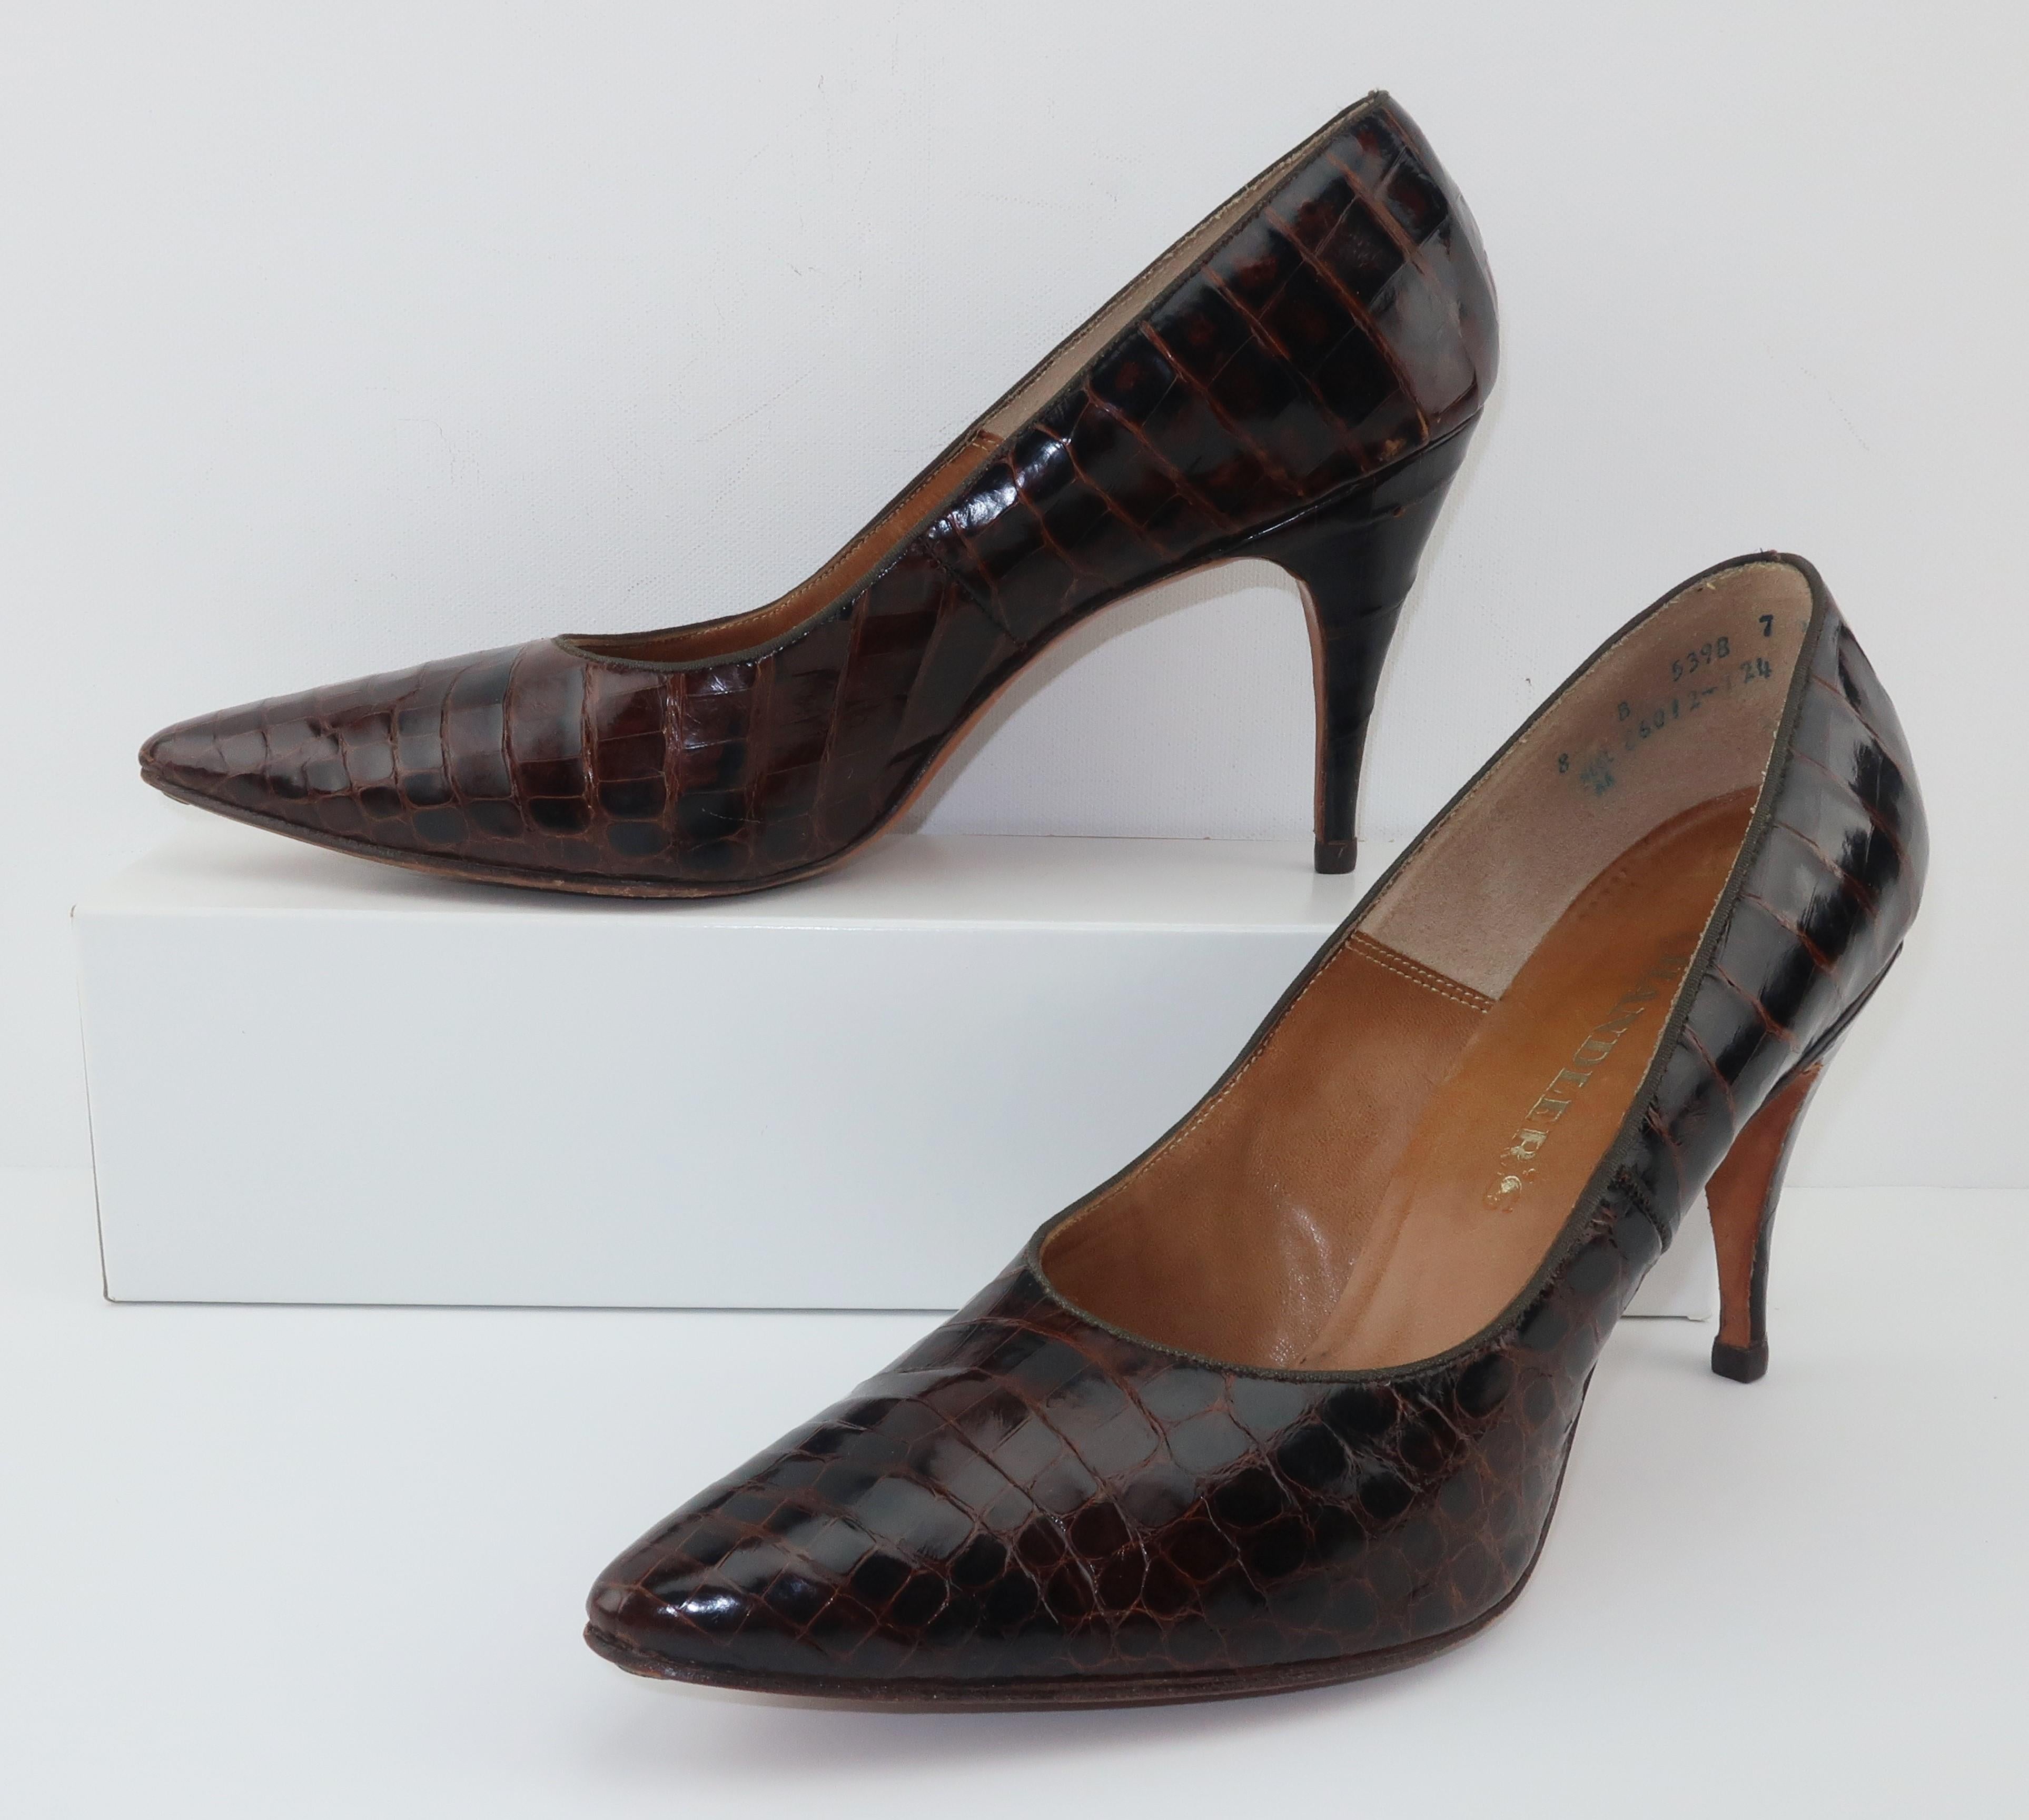 These timeless 1950’s brown alligator pointy toe pumps are a seasonless look ... equally as stylish with summer linens and winter tweeds.  The classic stiletto heel measures 3.5